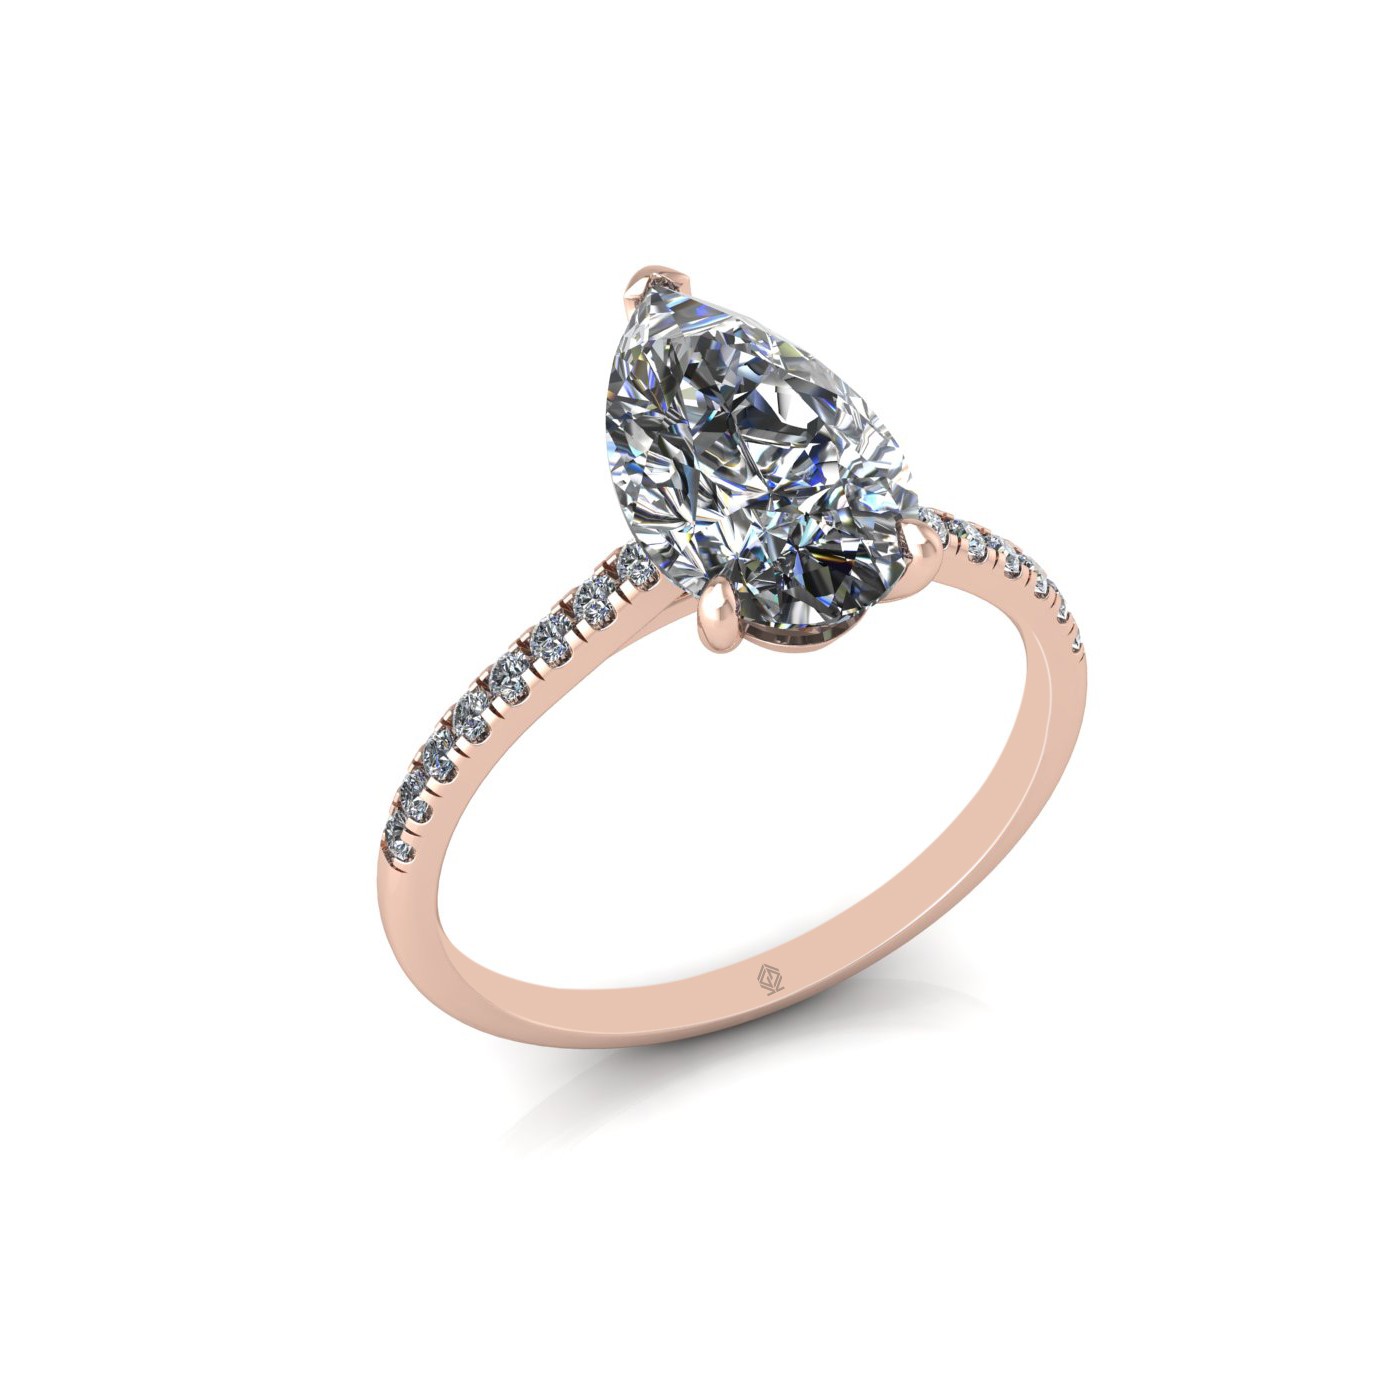 18k rose gold 2,00 ct 3 prongs pear diamond engagement ring with whisper thin pavÉ set band